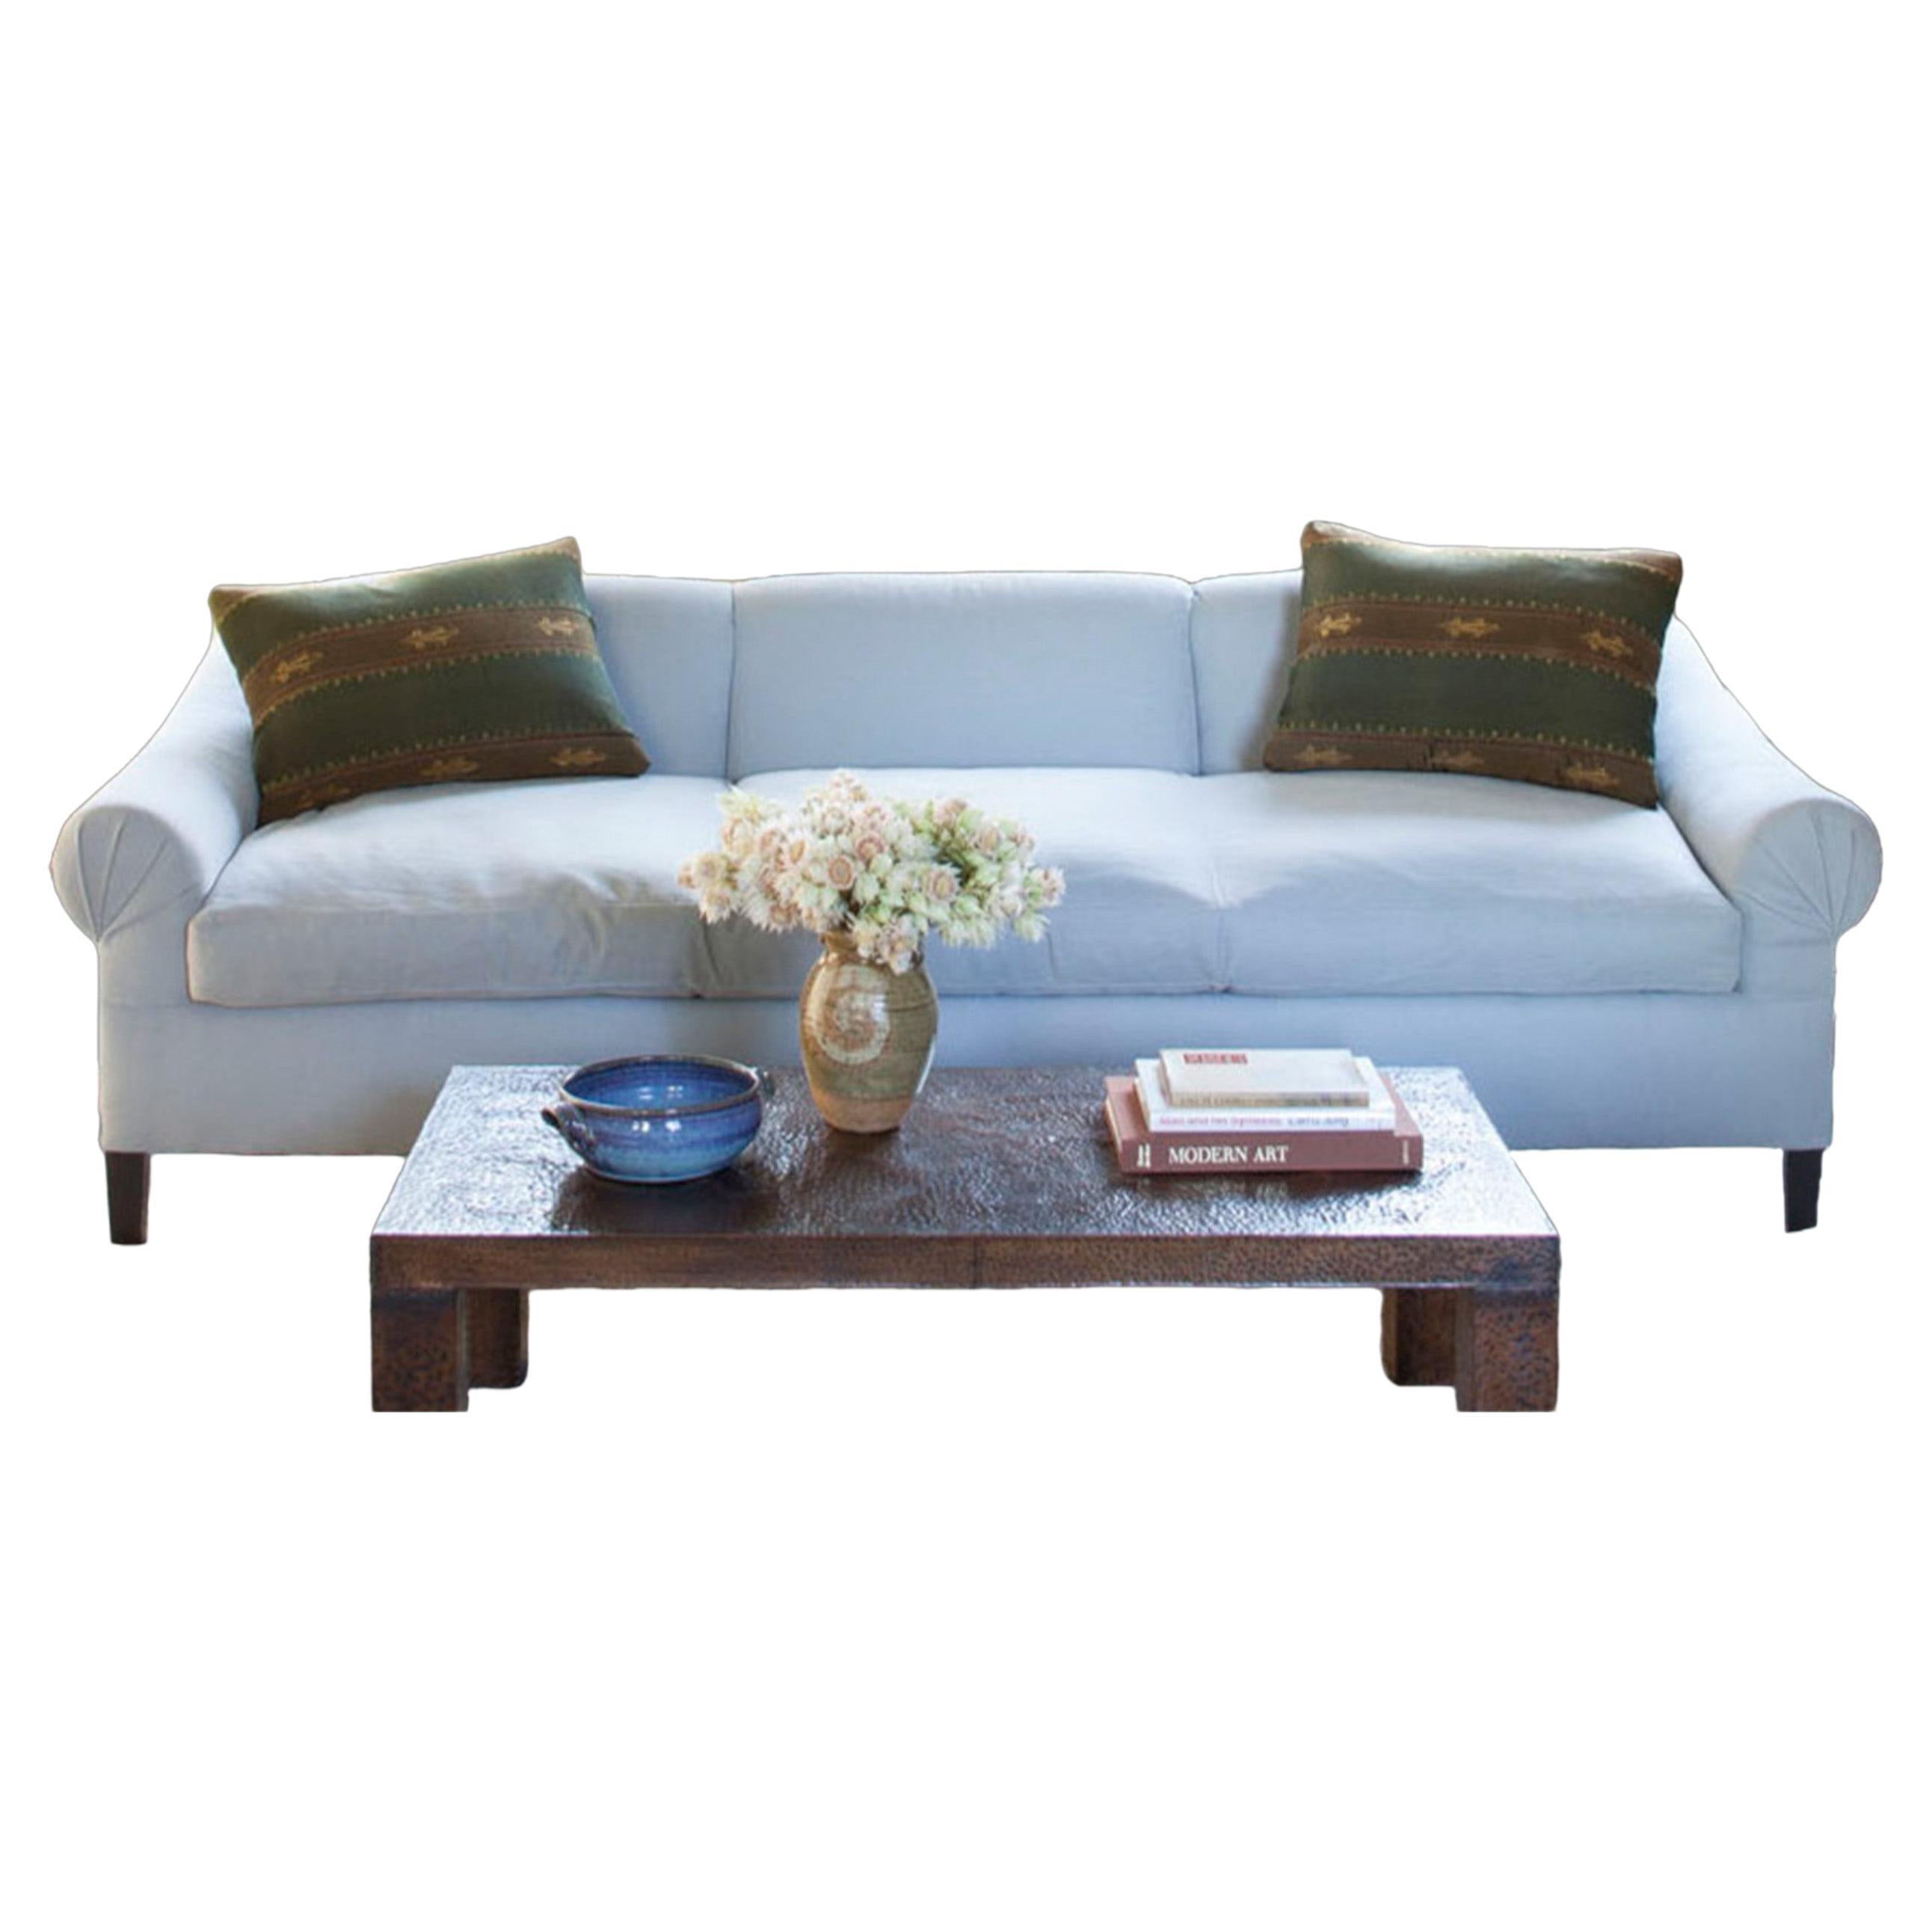 Scroll arm sofa featuring bench seat cushion and classic, American detailing. The Reade sofa frame is constructed using solid maple wood with 50 / 50 down feather filled cushions. Four finishes available for sofa legs. Available in four cotton